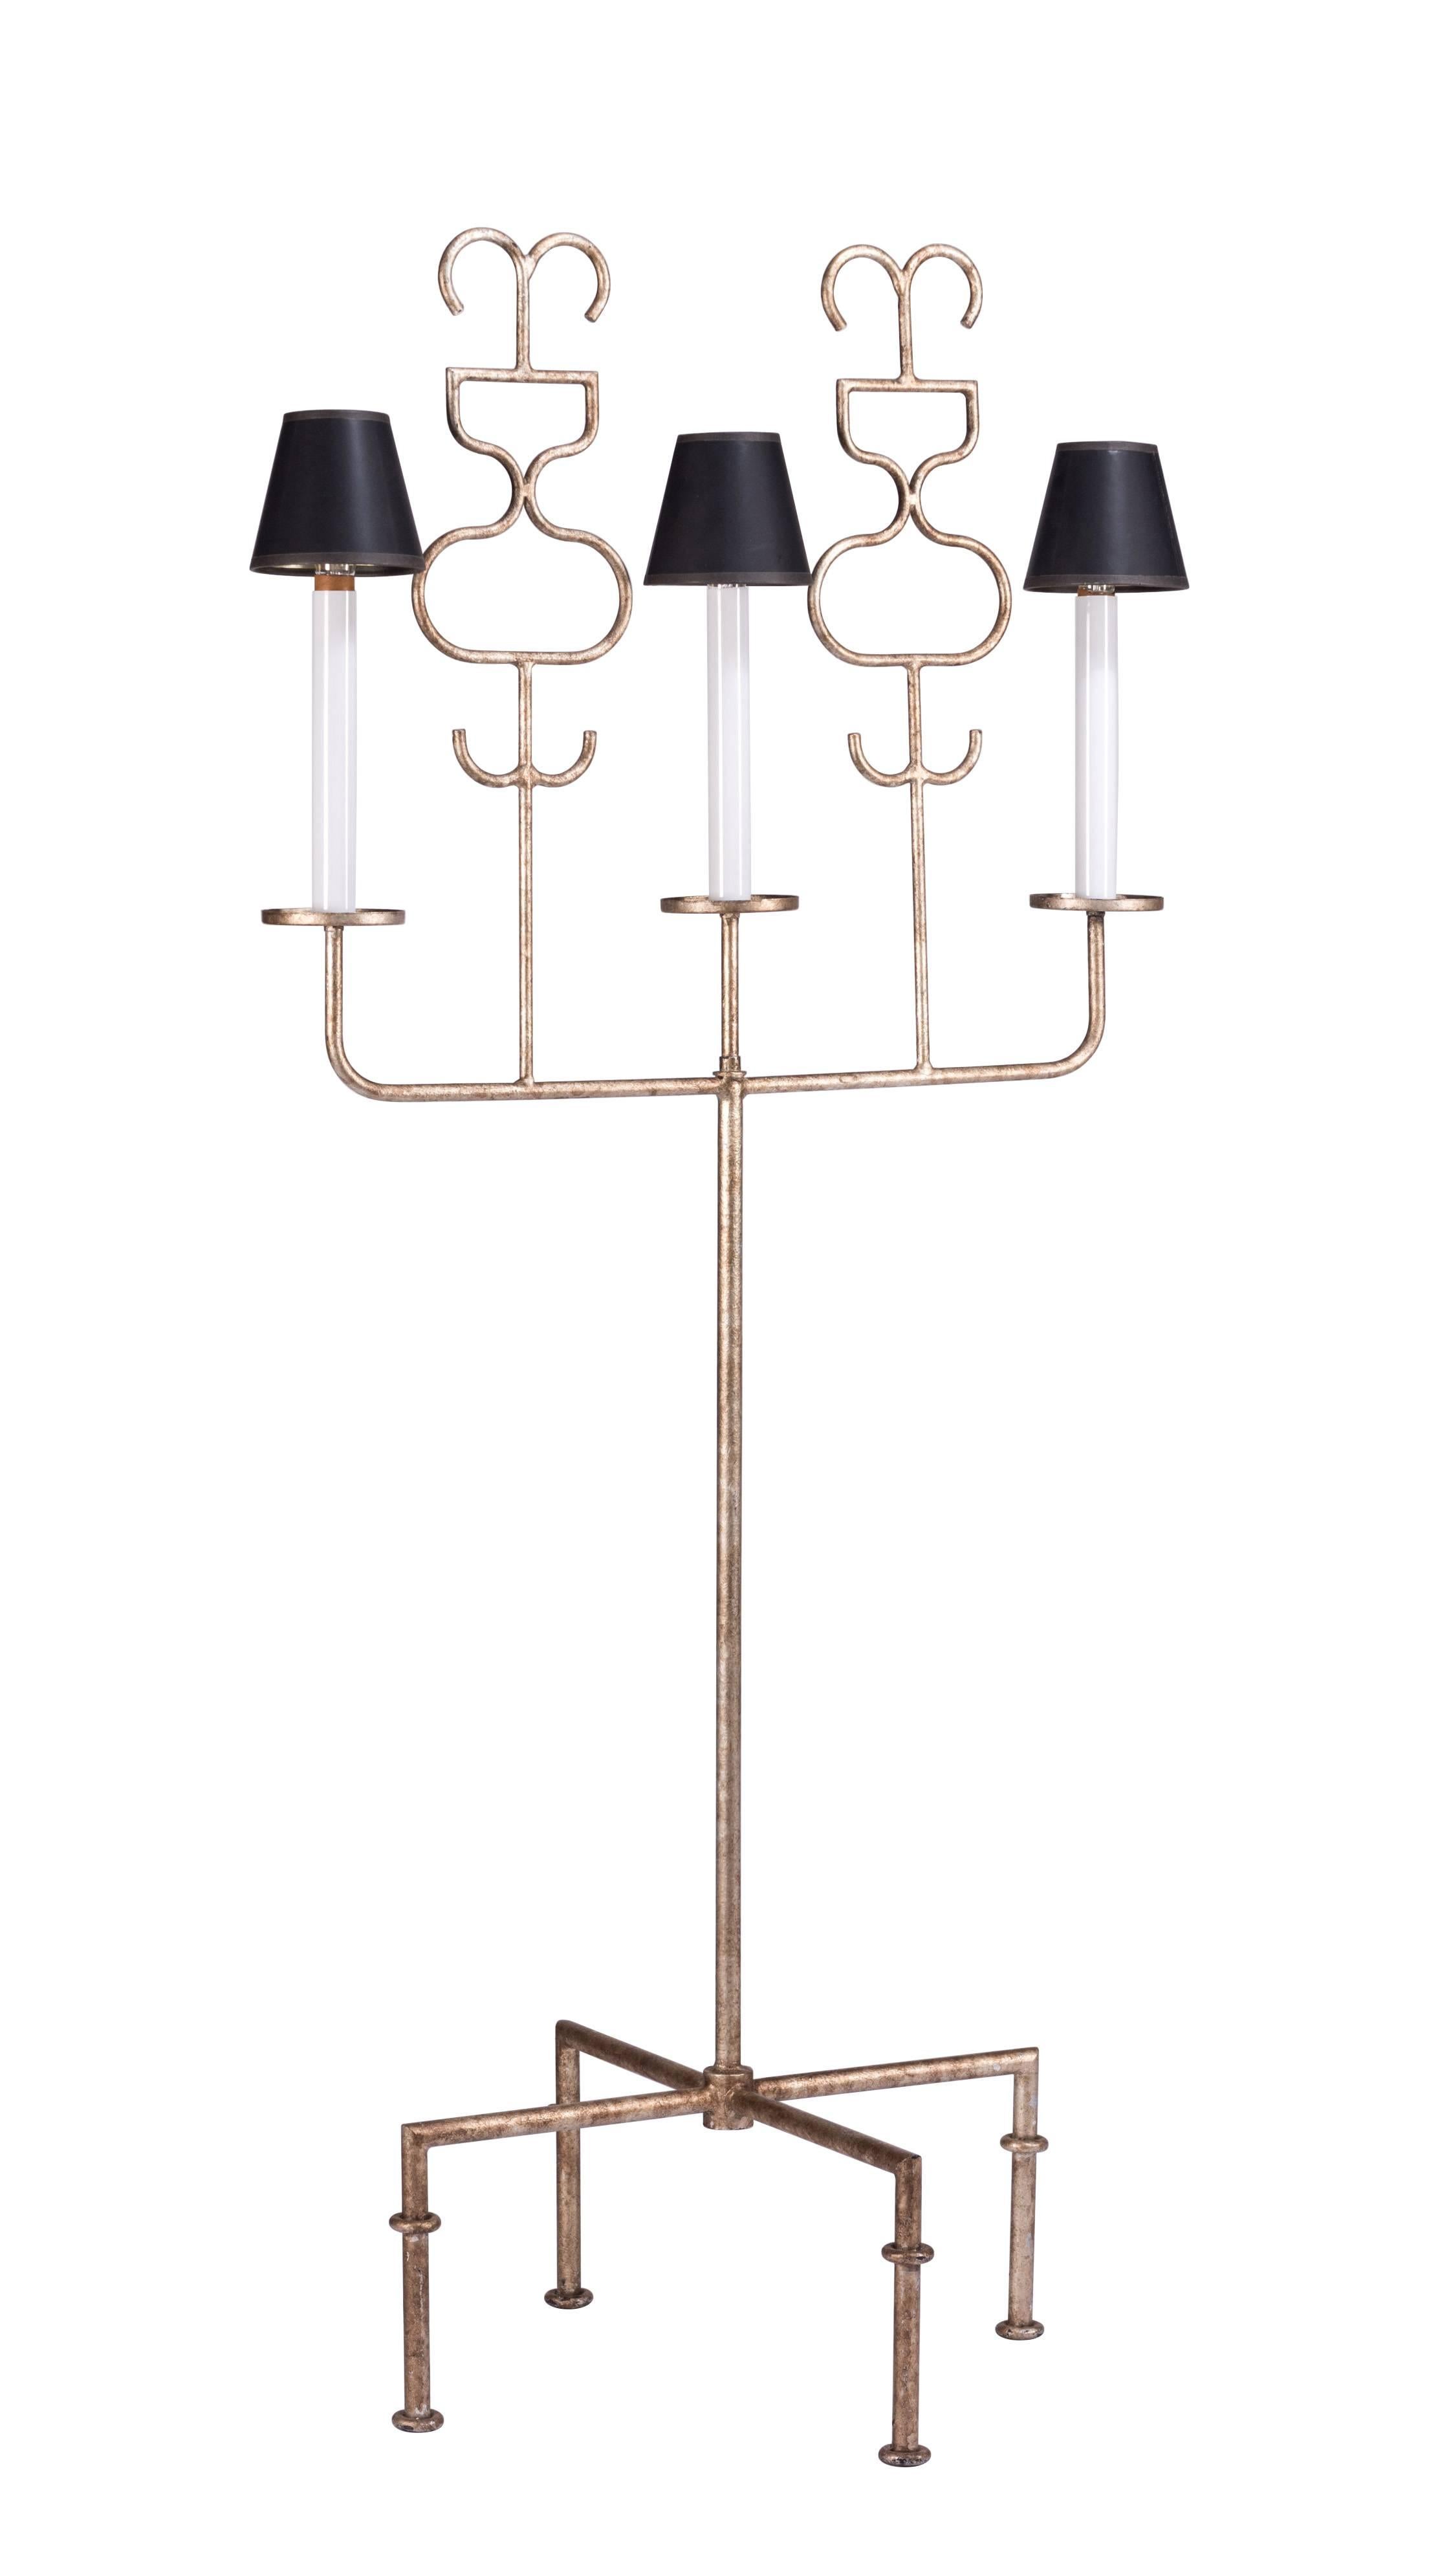 Whimsical enameled steel floor lamp by Parzinger for Parzinger Originals, circa 1960. The enameling on the steel standard gives the appearance the metal is covered in silver leaf. In good working order.